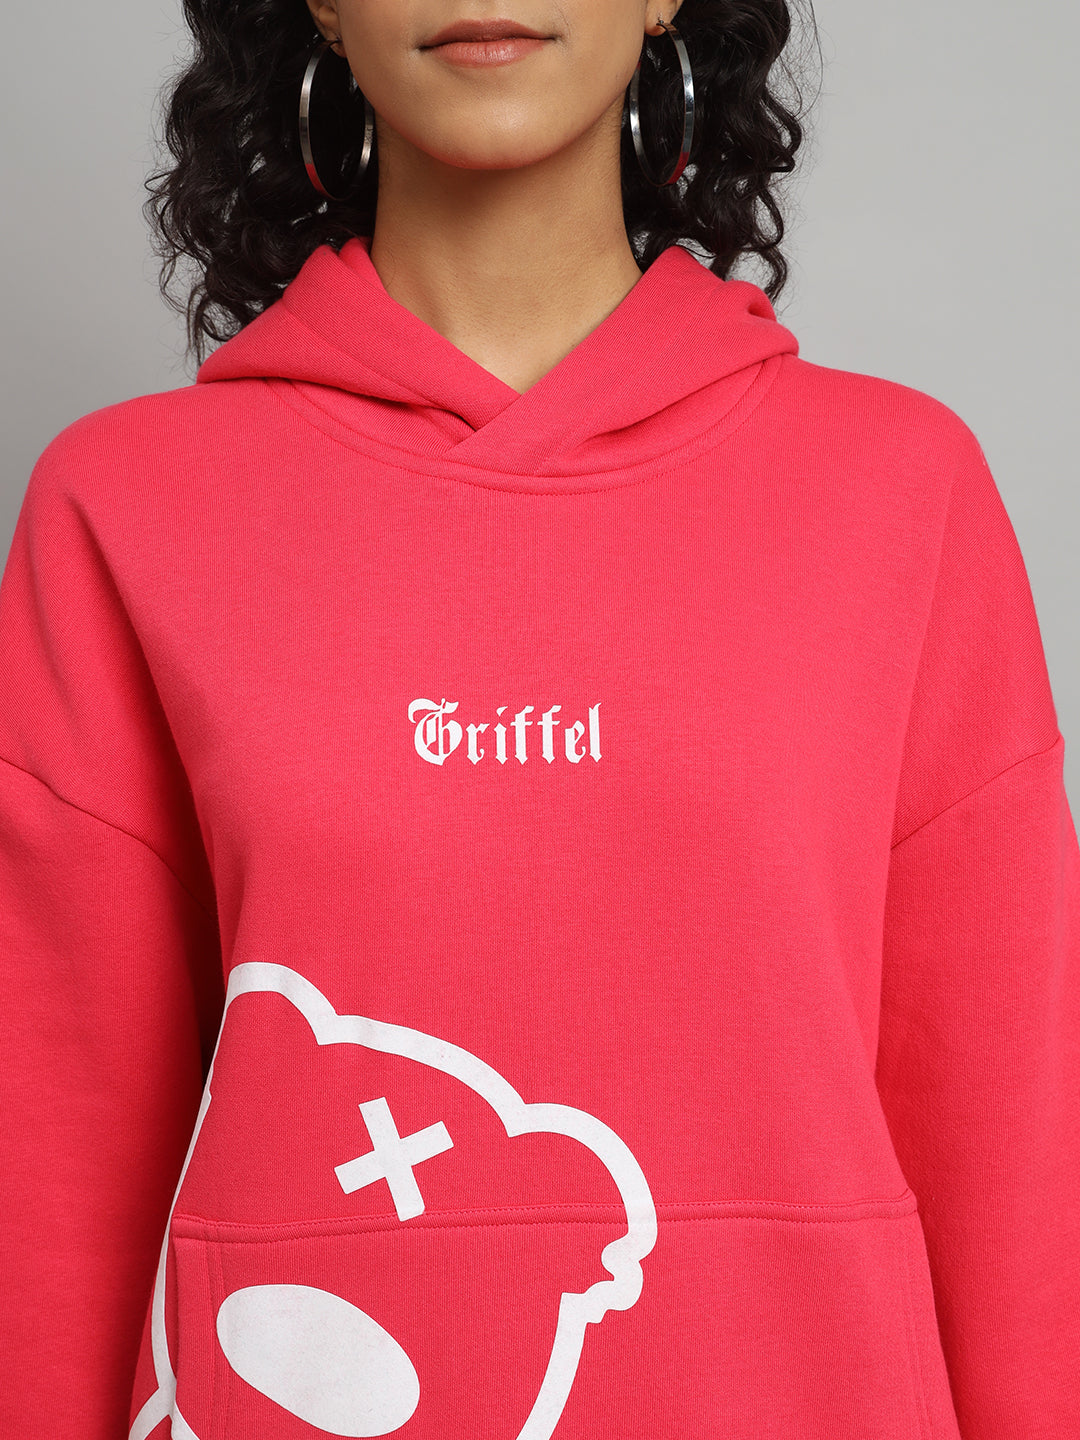 Griffel Women Oversized Fit TEDDY Print 100% Cotton Neon Pink Fleece Hoodie and trackpant - griffel